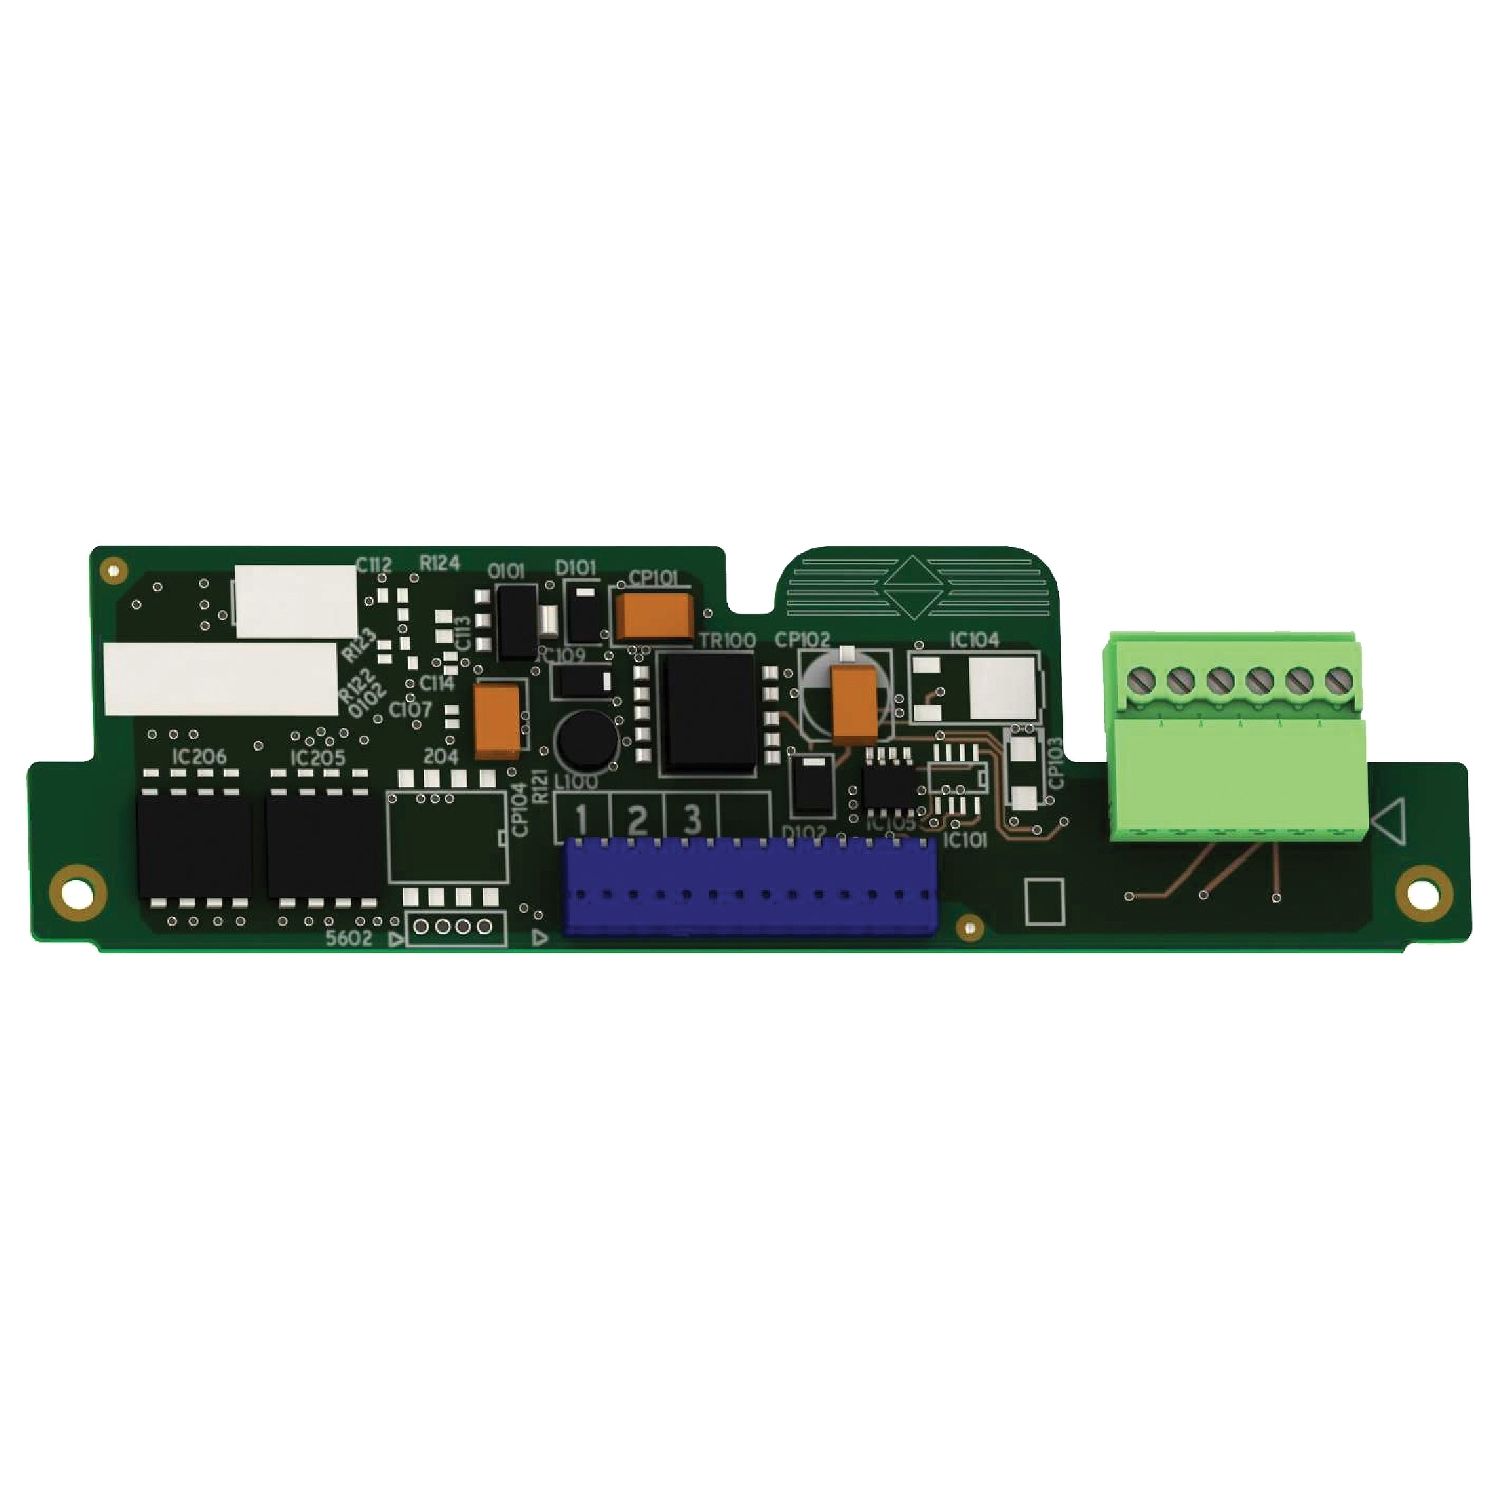 VW3A3401 encoder interface card with RS422 compatible differential outpts - 5 V DC